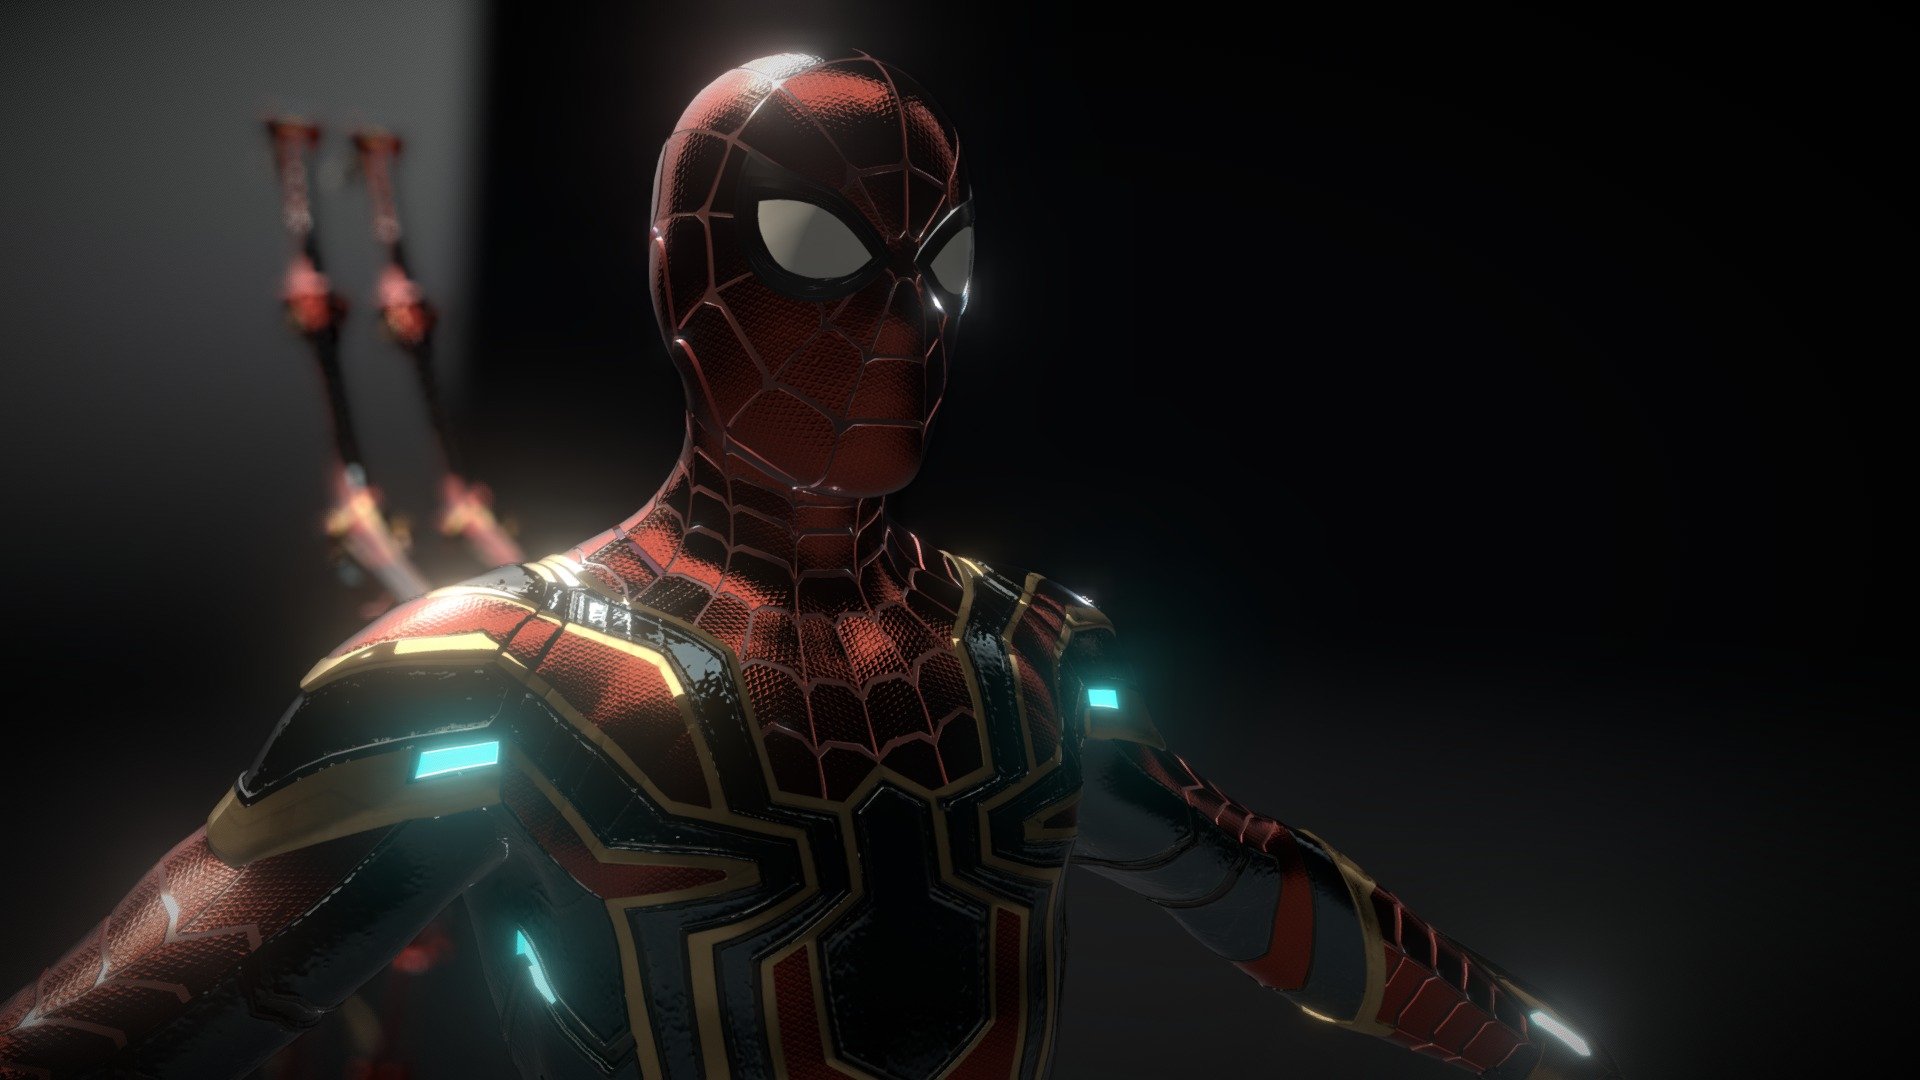 Hey artists use model to improve your animation level

good day

don't forget to follow - iron spider suit mcu - 3D model by Itx prince (@sundar94116) 3d model